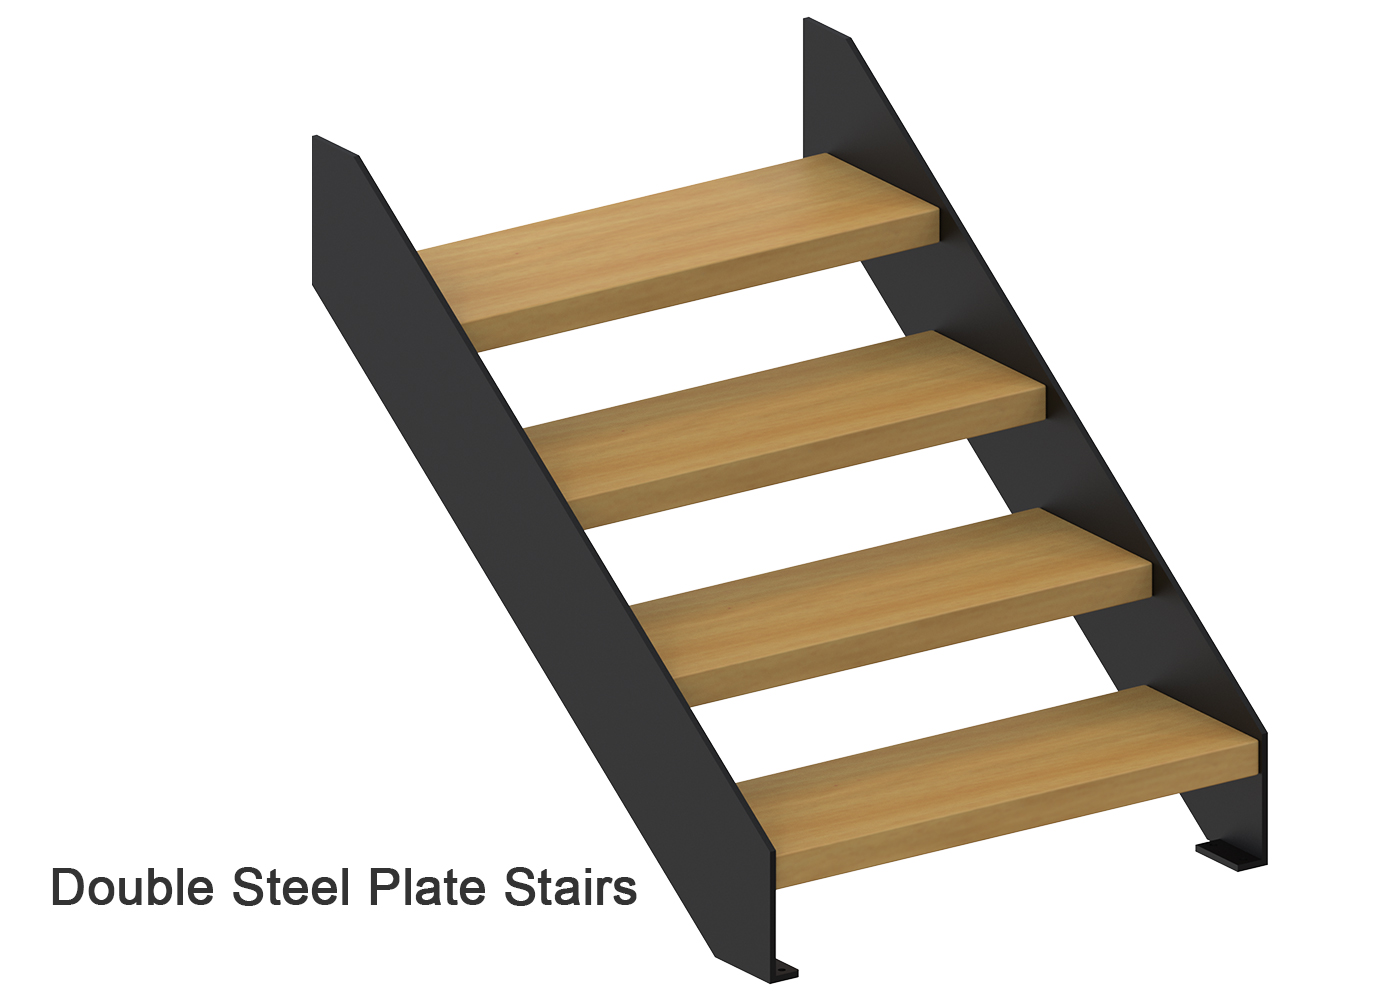 Double Steel Plate Stairs